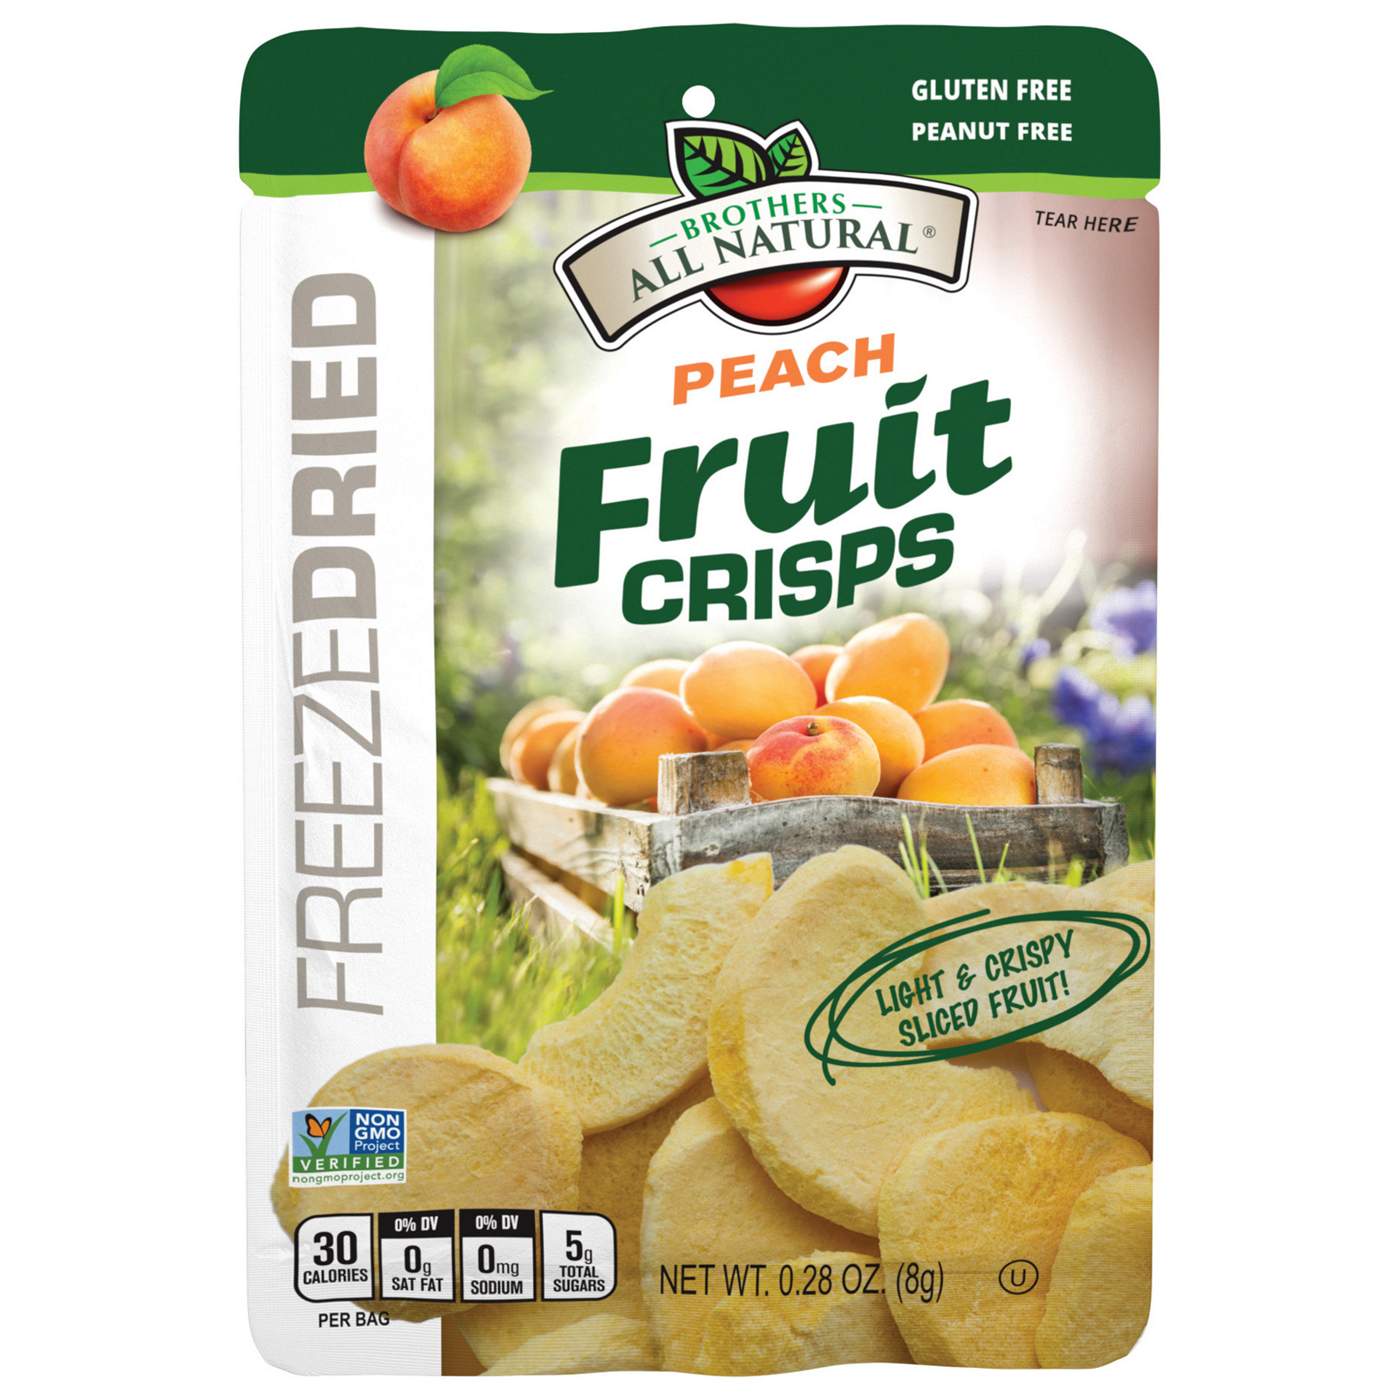 Brothers All Natural Peach Freeze-Dried Fruit Crisps; image 1 of 3